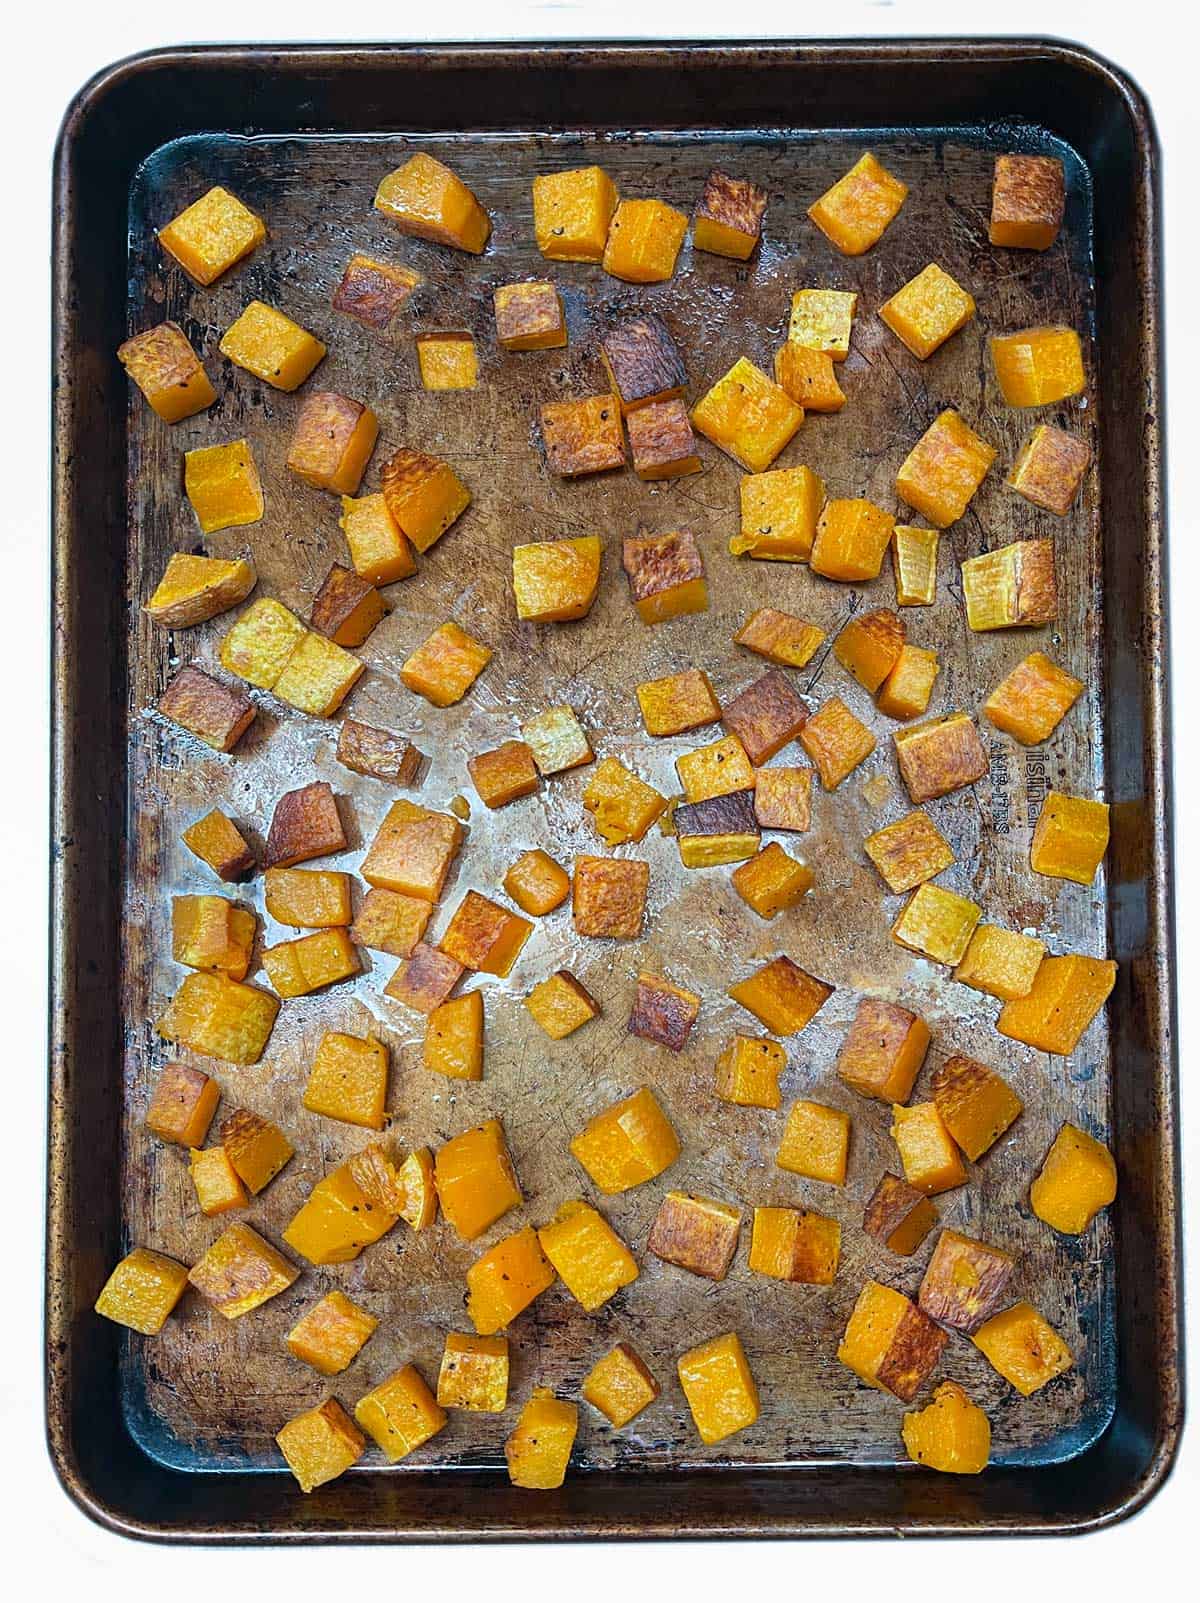 cubes of roasted butternut squash on a rimmed baking sheet